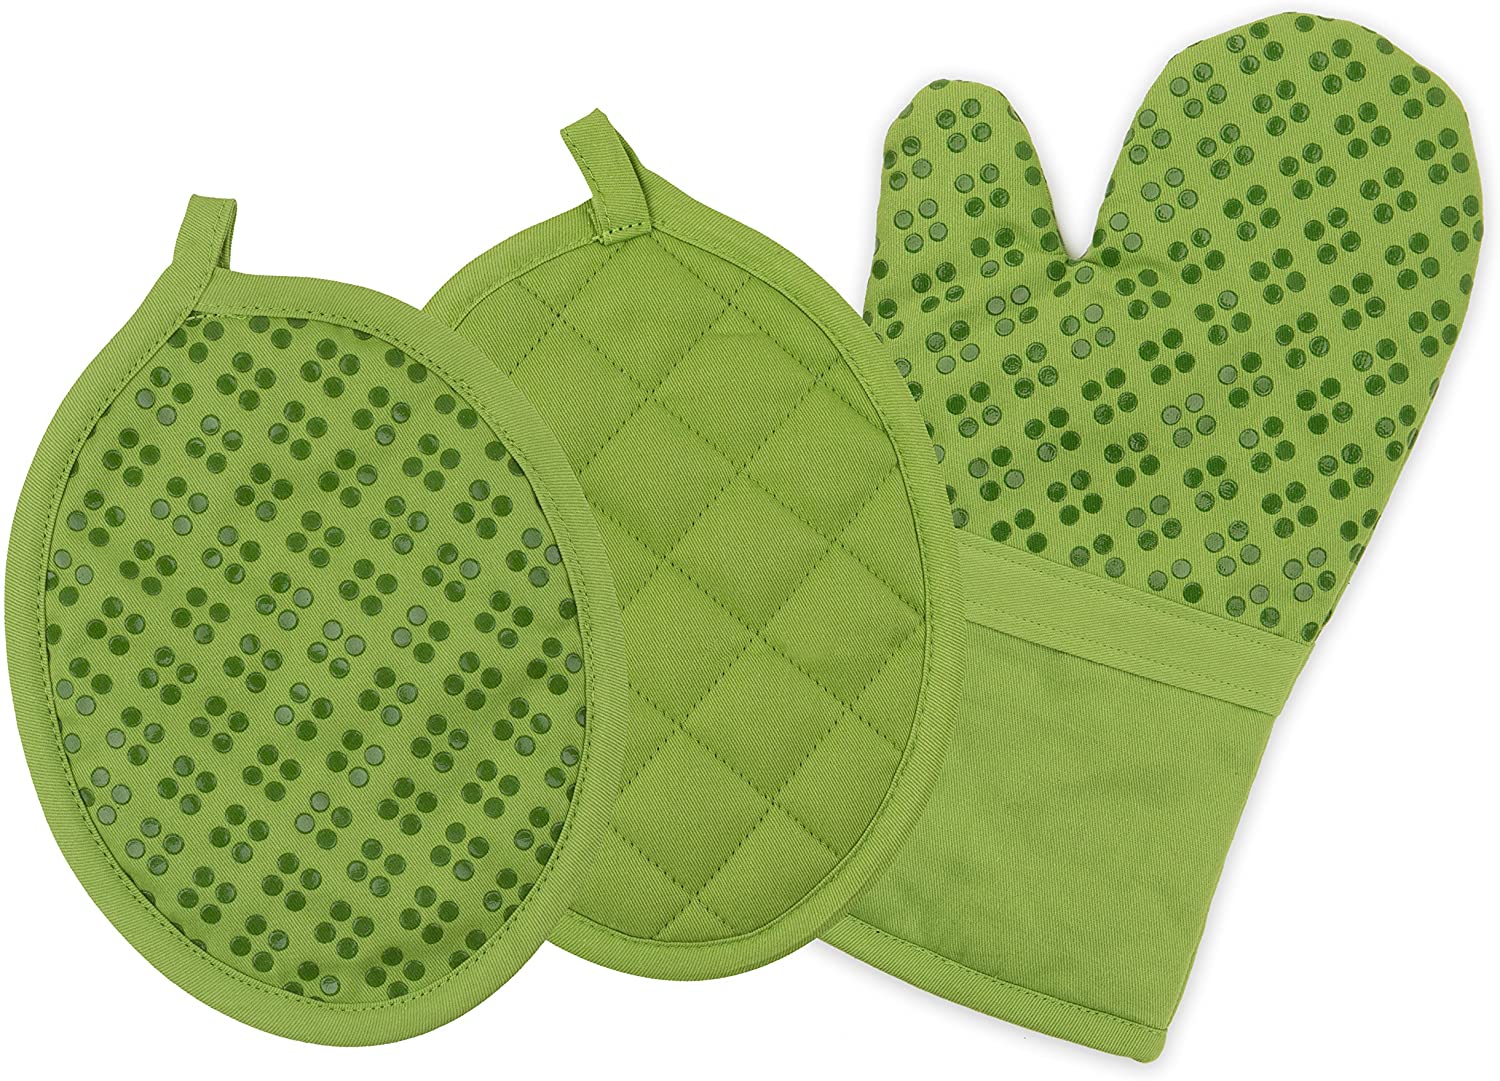 Fretwork Green & White Oven Mitts and Pot Holders Set - 1 Piece of Each